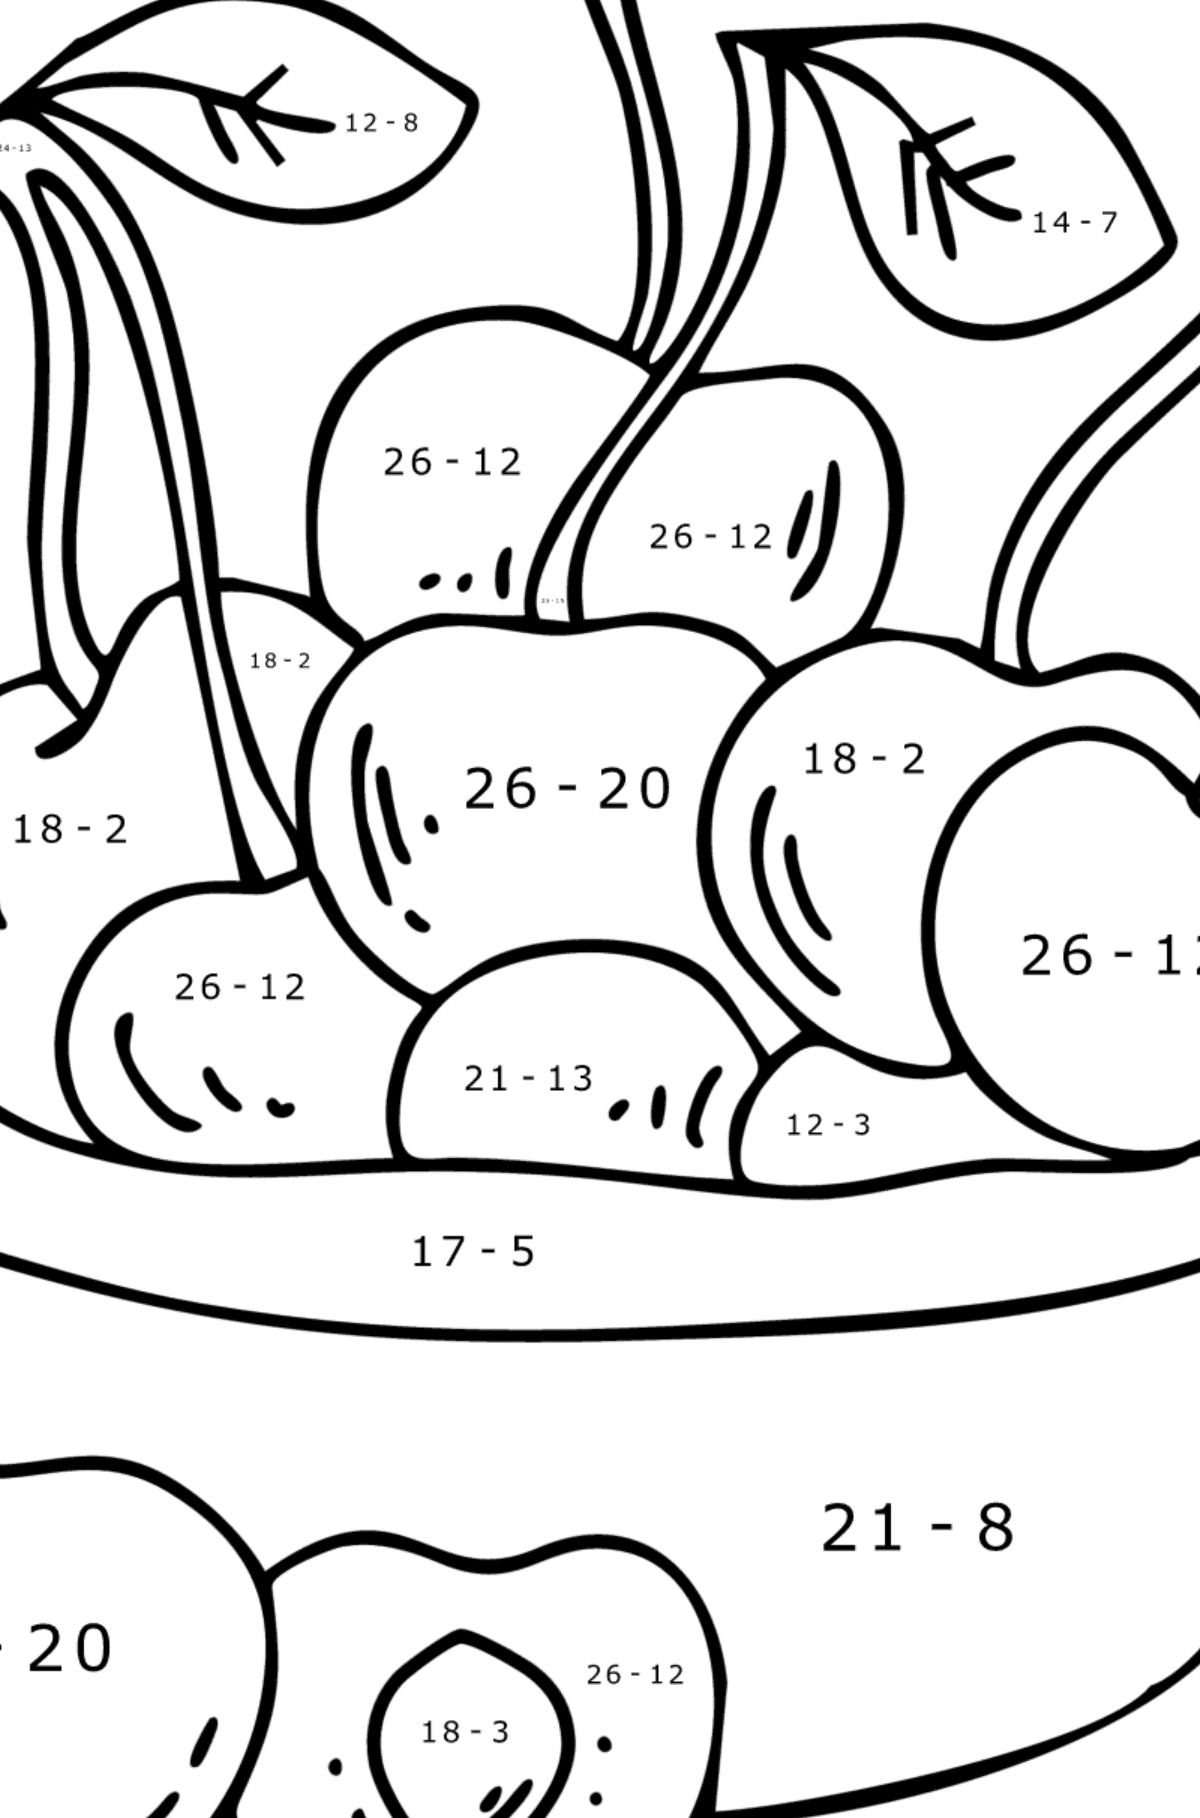 Cherries Plate Coloring Page - Math Coloring - Subtraction for Kids